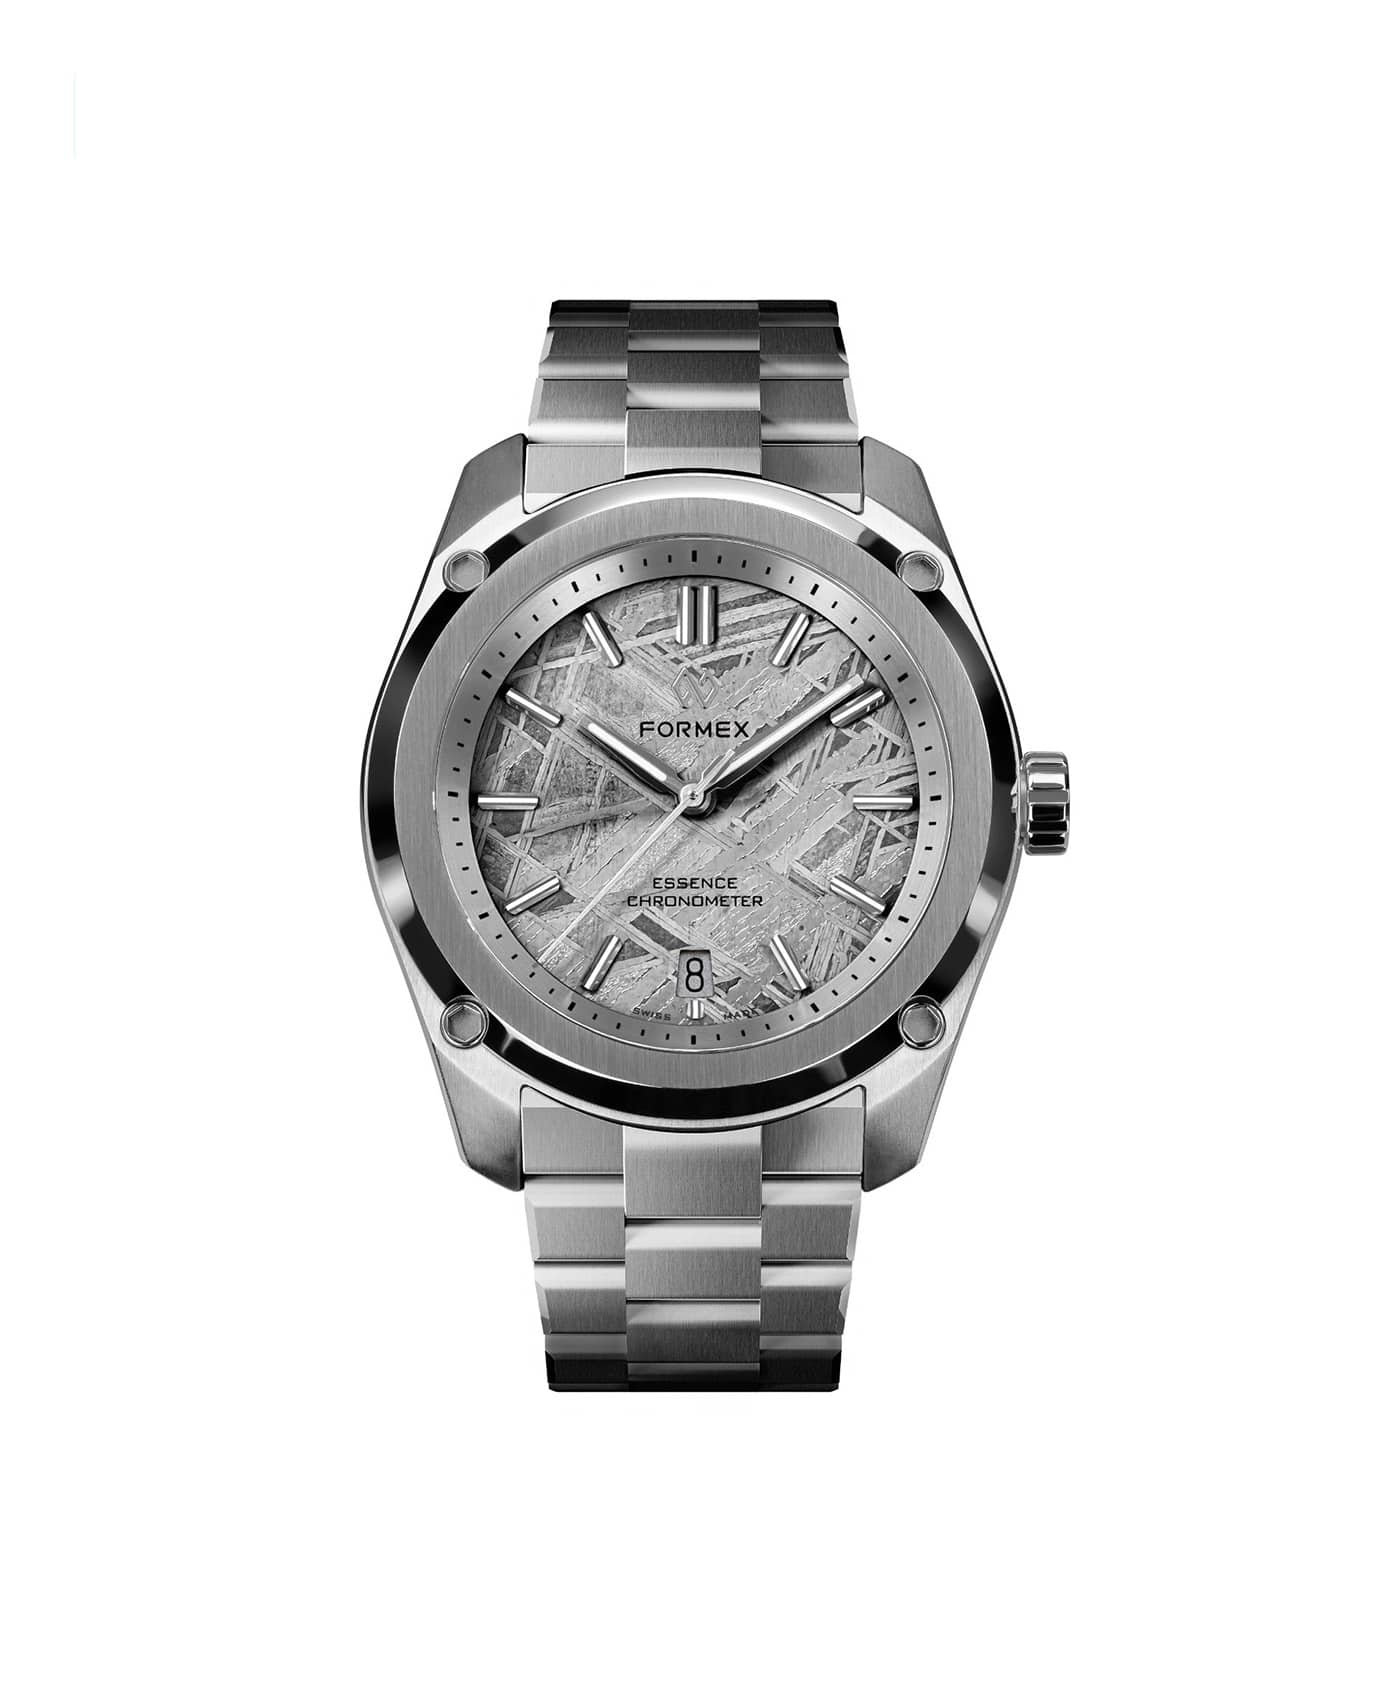 Formex - Essence ThirtyNine (39mm) Automatic Chronometer - SPACE ROCK - Limited Edition - Steel Bracelet-min